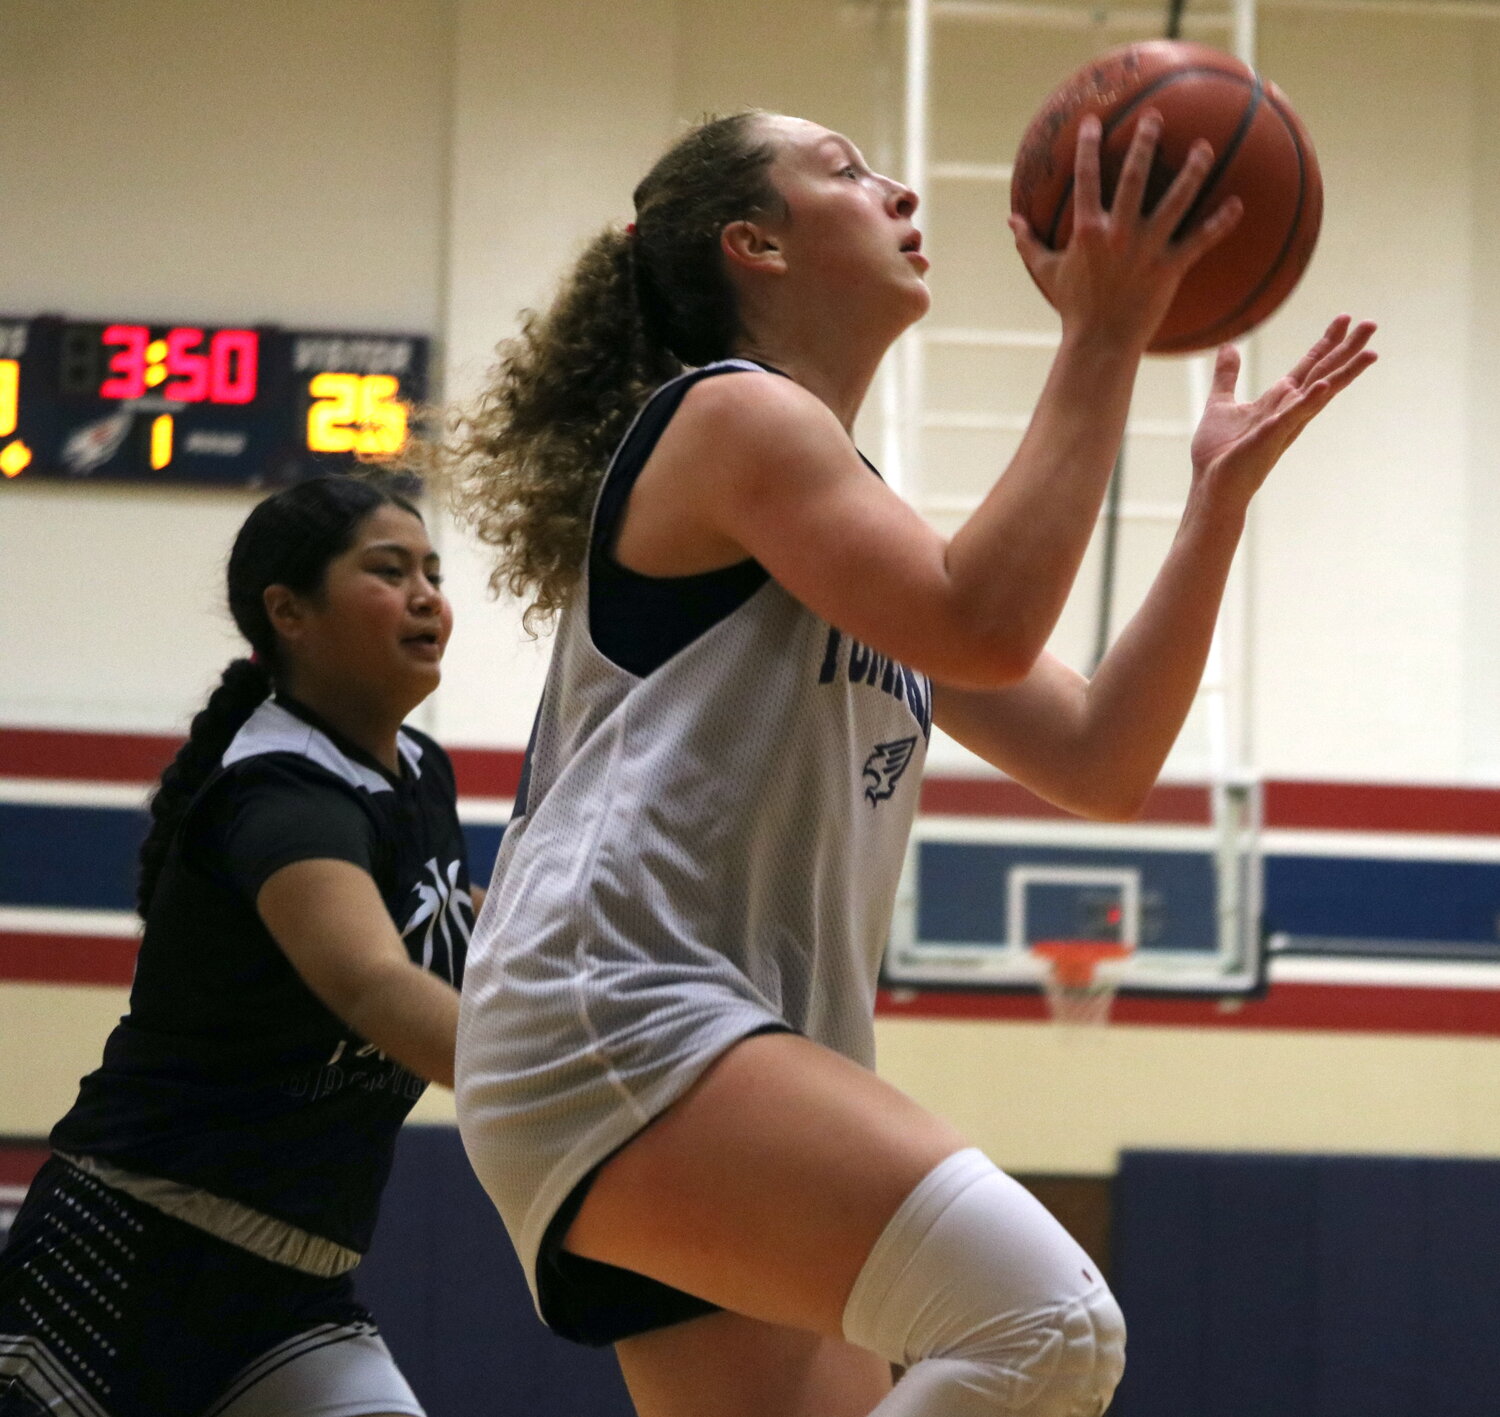 Gabby Panter drives to the basket during Thursday's game between Tompkins and Laredo United South defenders at the Tompkins gym.